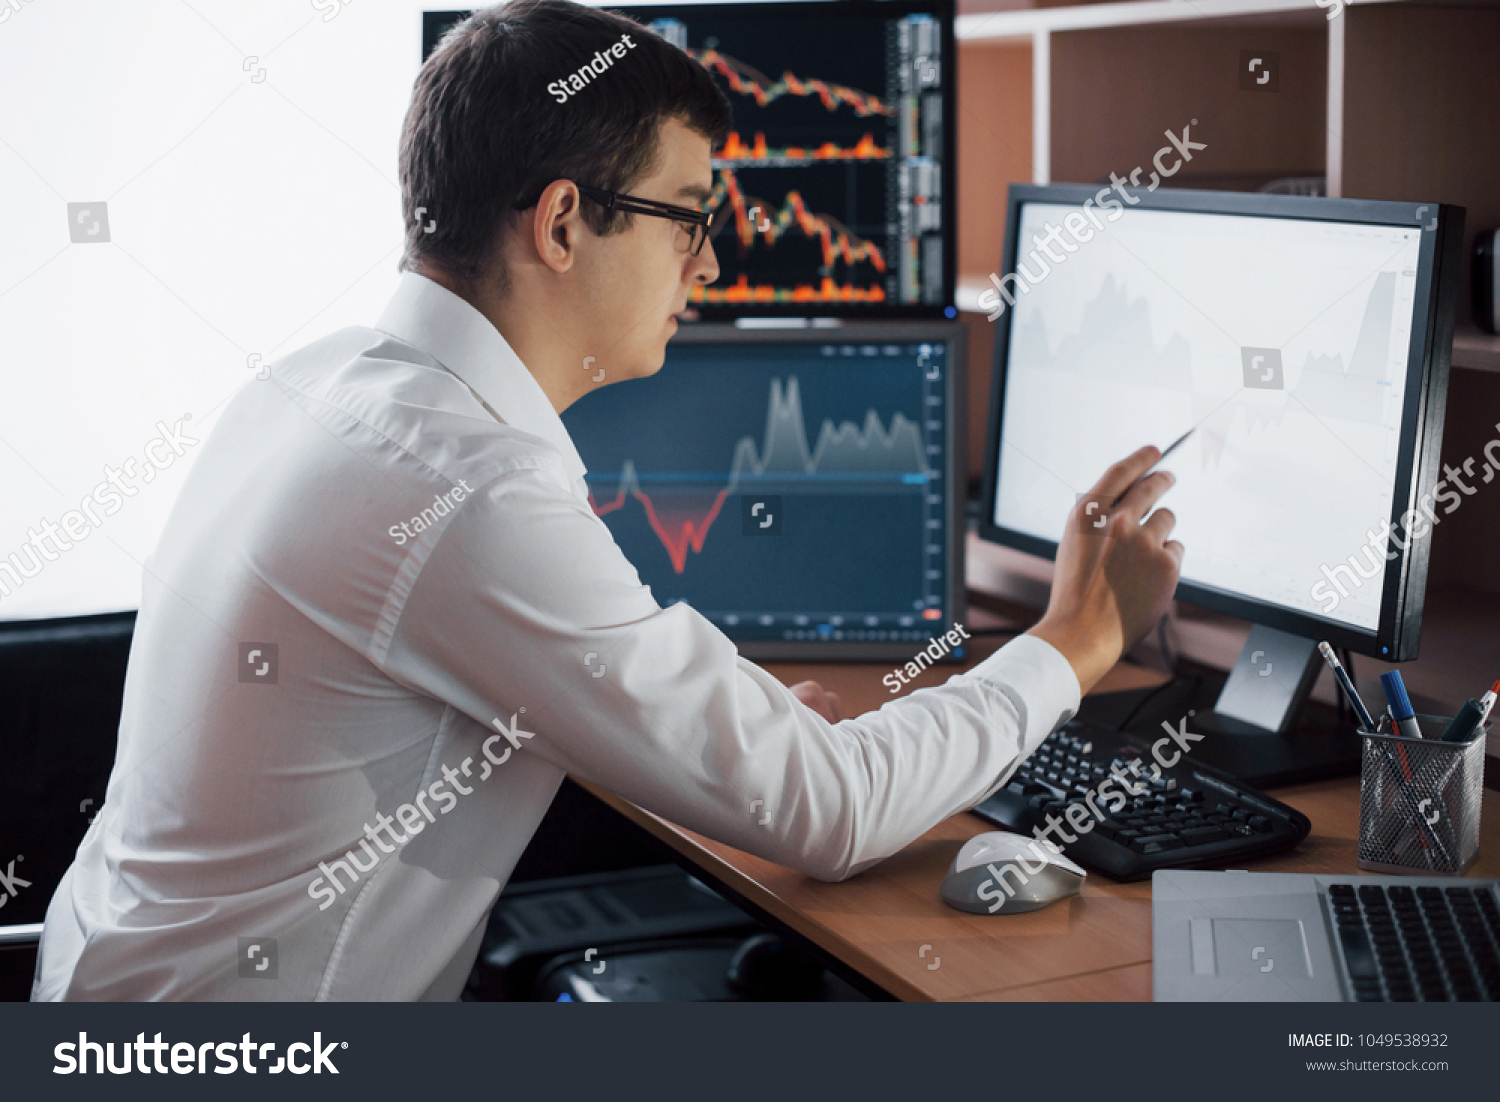 Busy working day. Close-up of young businessman looking at monitor while sitting at the desk in creative office. #1049538932